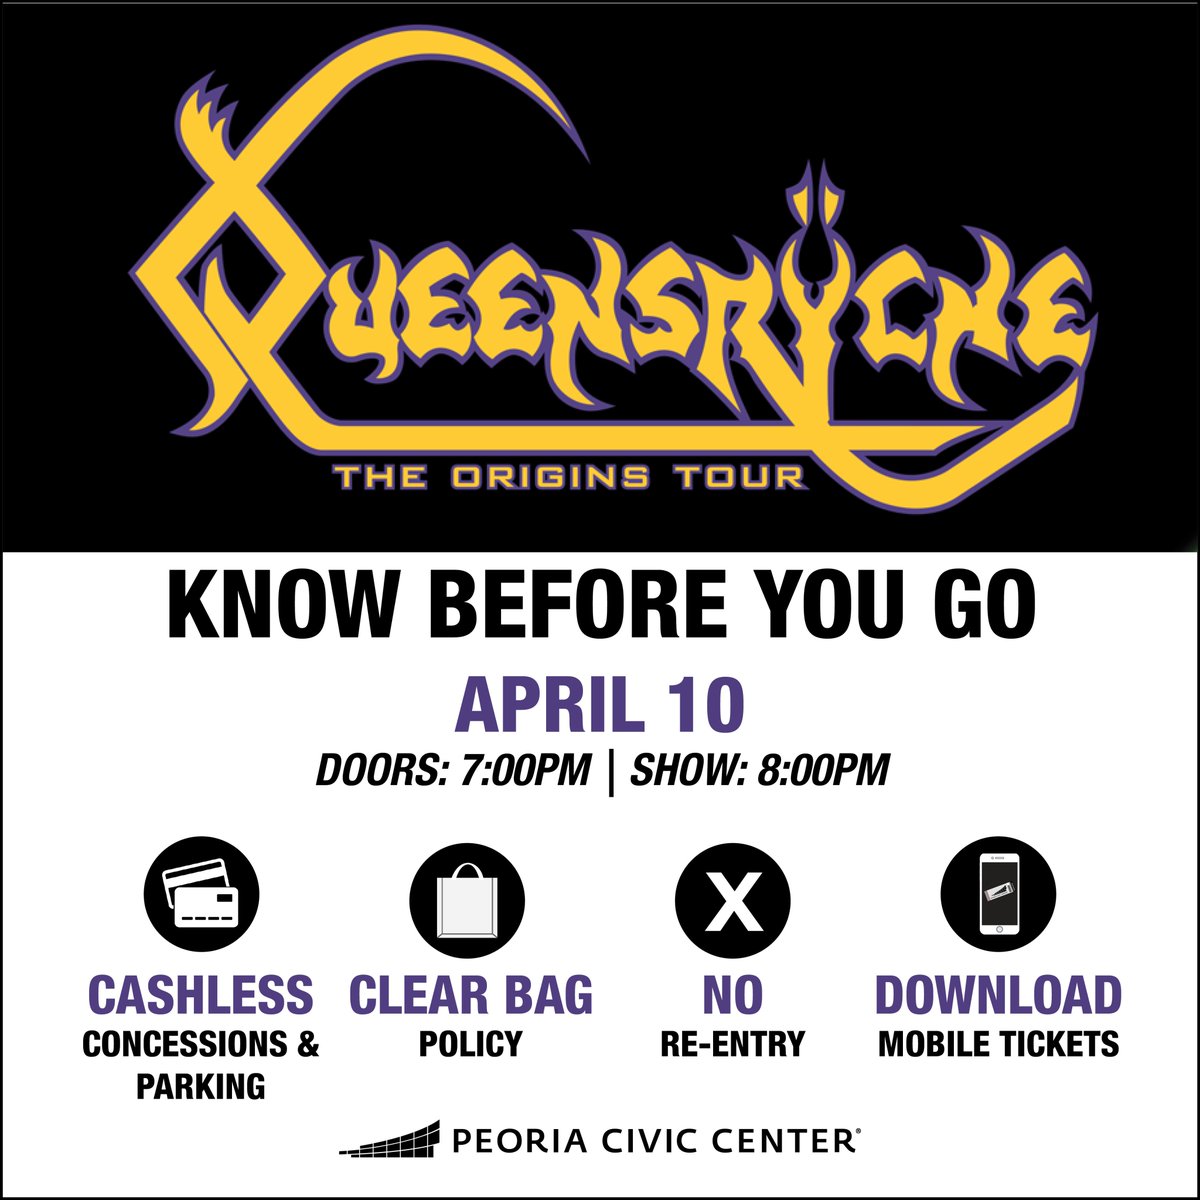 KNOW BEFORE YOU GO Queensryche will be in the Peoria Civic Center Theater on Wednesday! Here are some important reminders before you go to the show. More details at bit.ly/PCCKnowBeforeY…